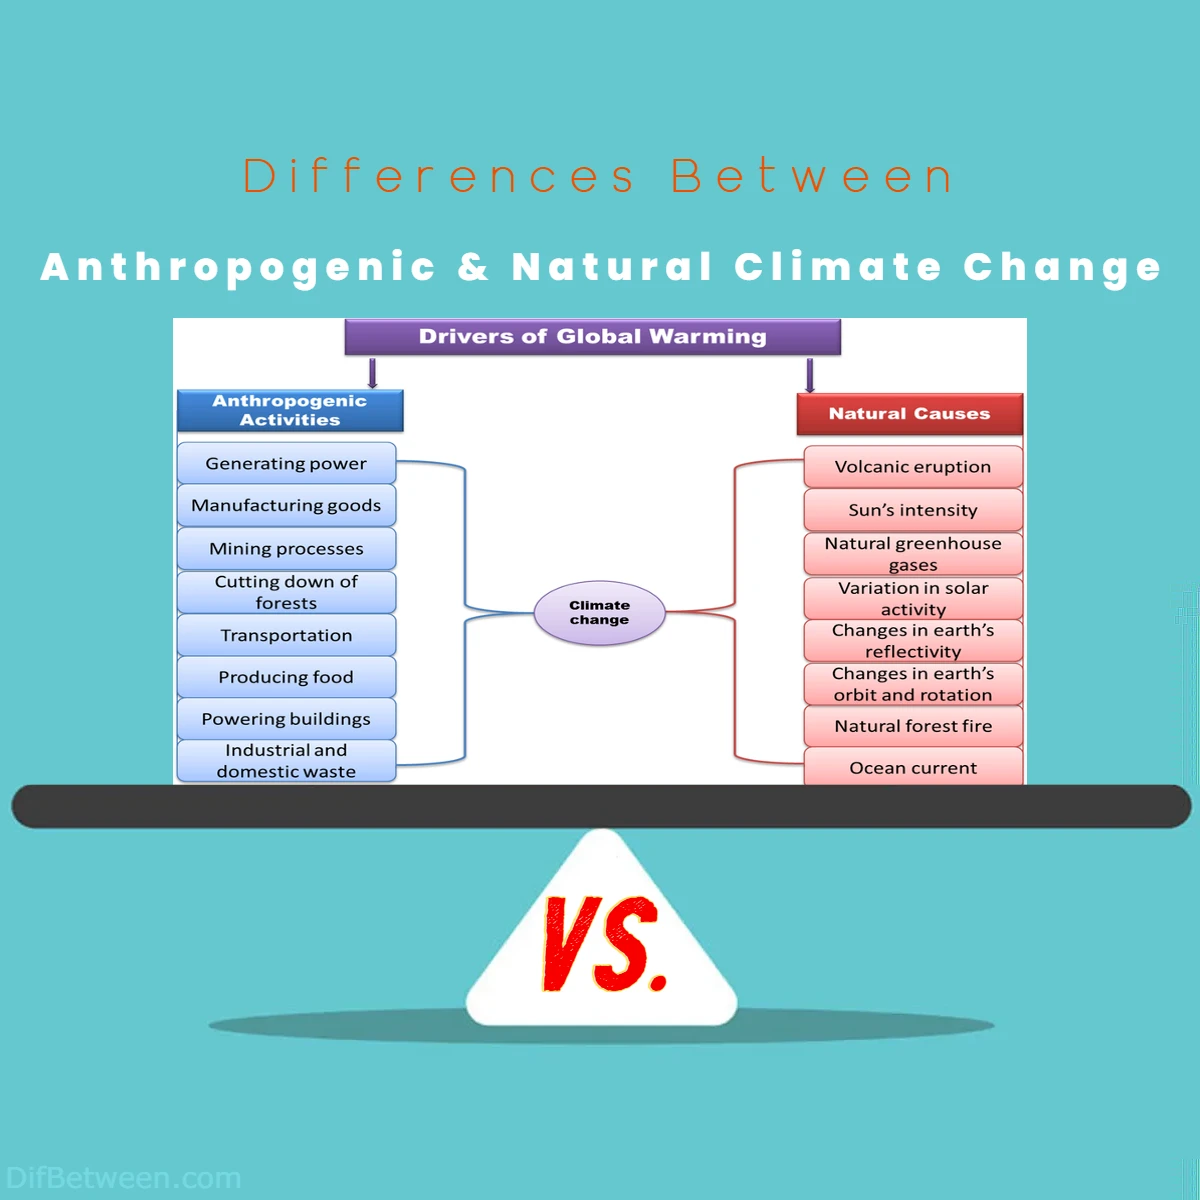 Differences Between Anthropogenic vs Natural Climate Change